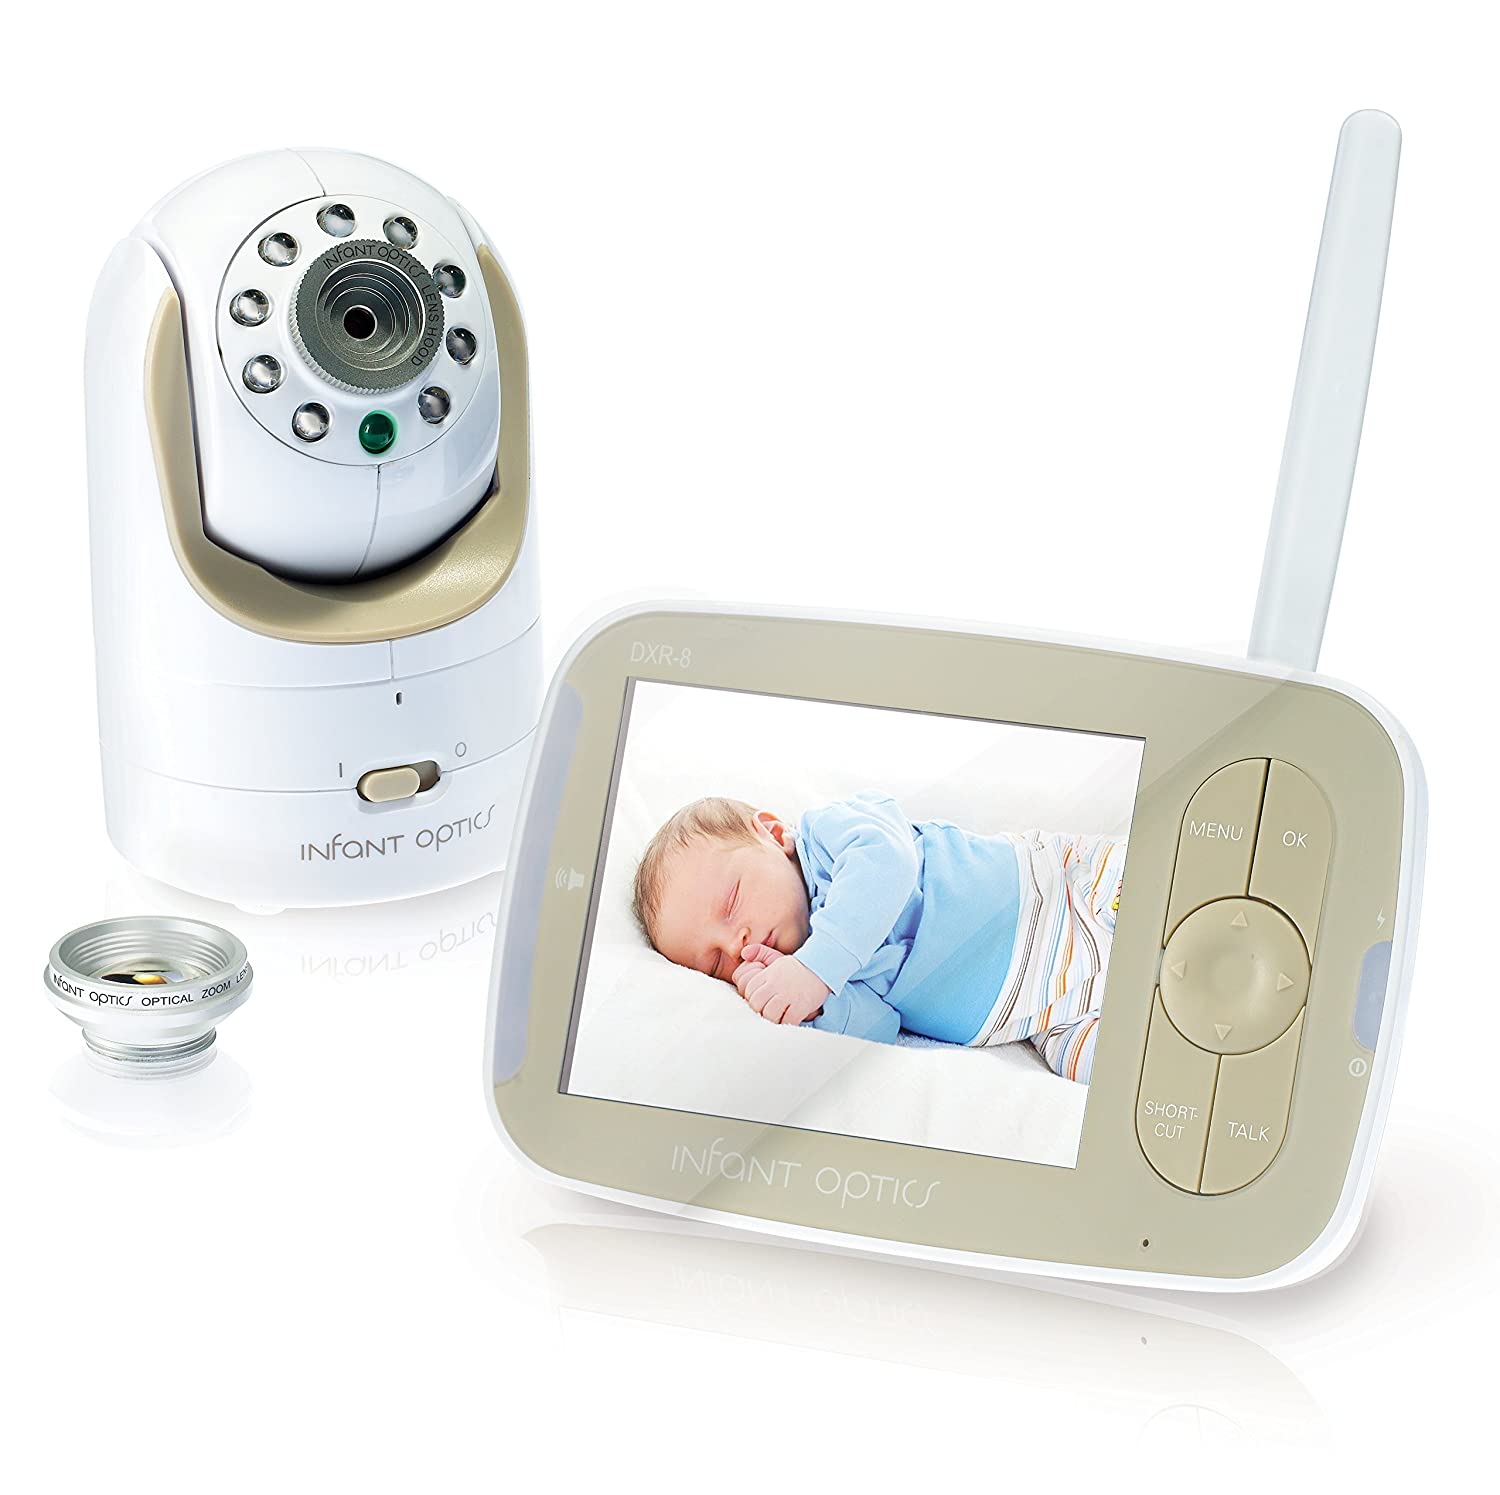 Infant Optics - DXR-8 Video Baby Monitor with 3.5" Screen - Gold/White